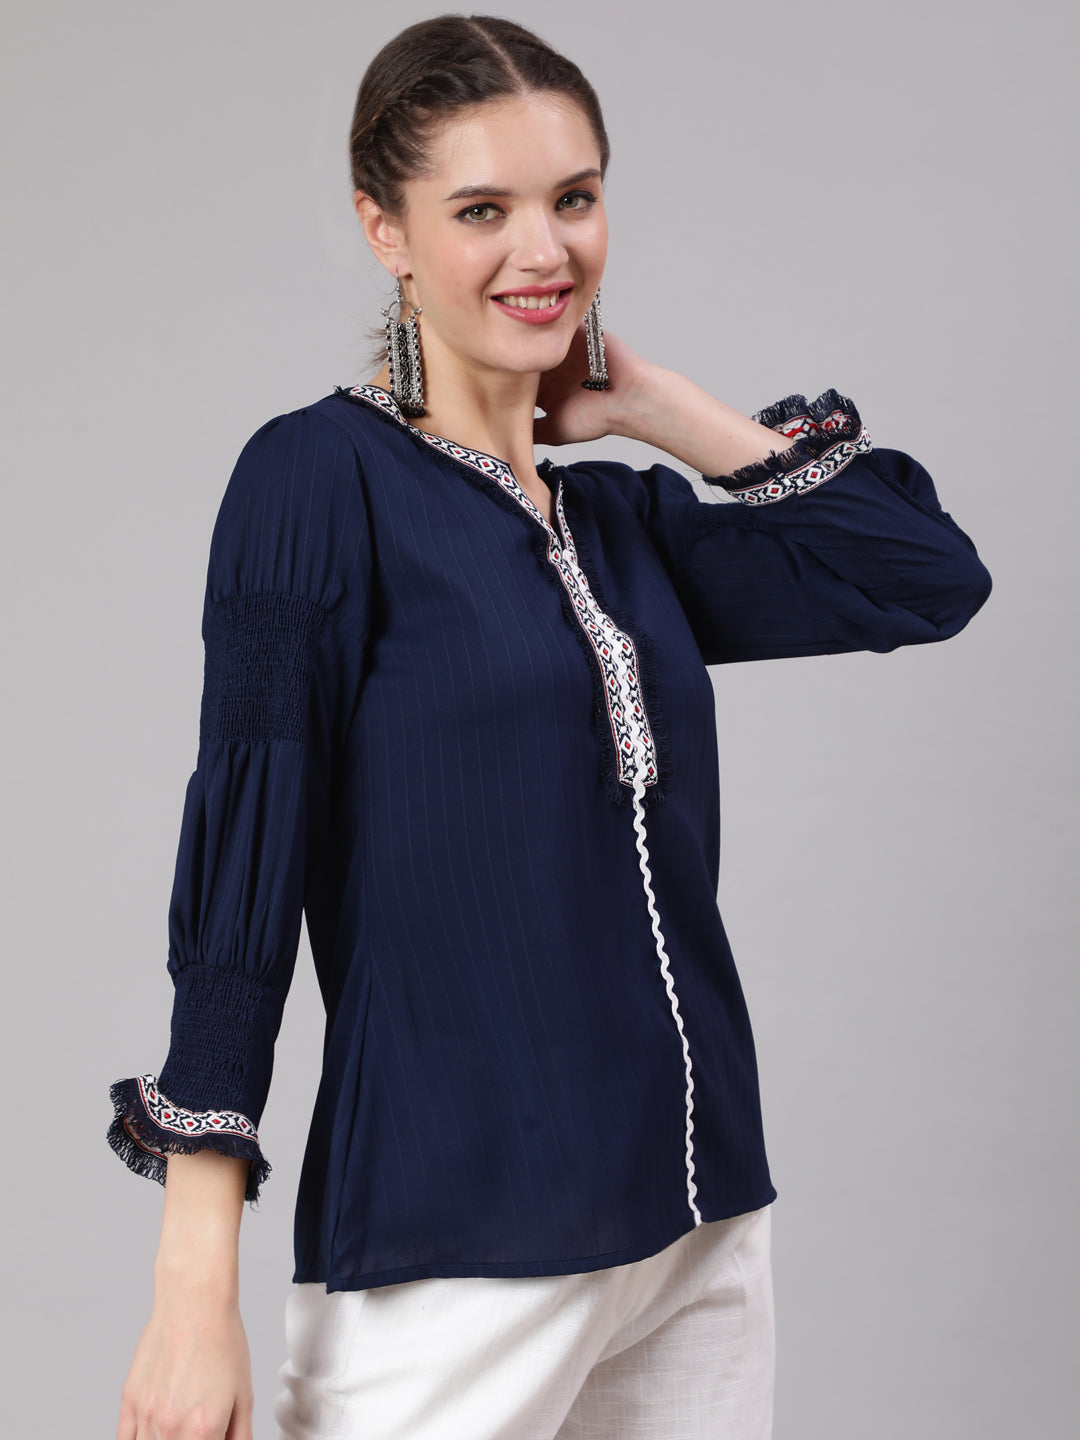 A Blue Silk Blend Lace Embellished Top With Smocked Sleeves With Wide-Leg White Pants